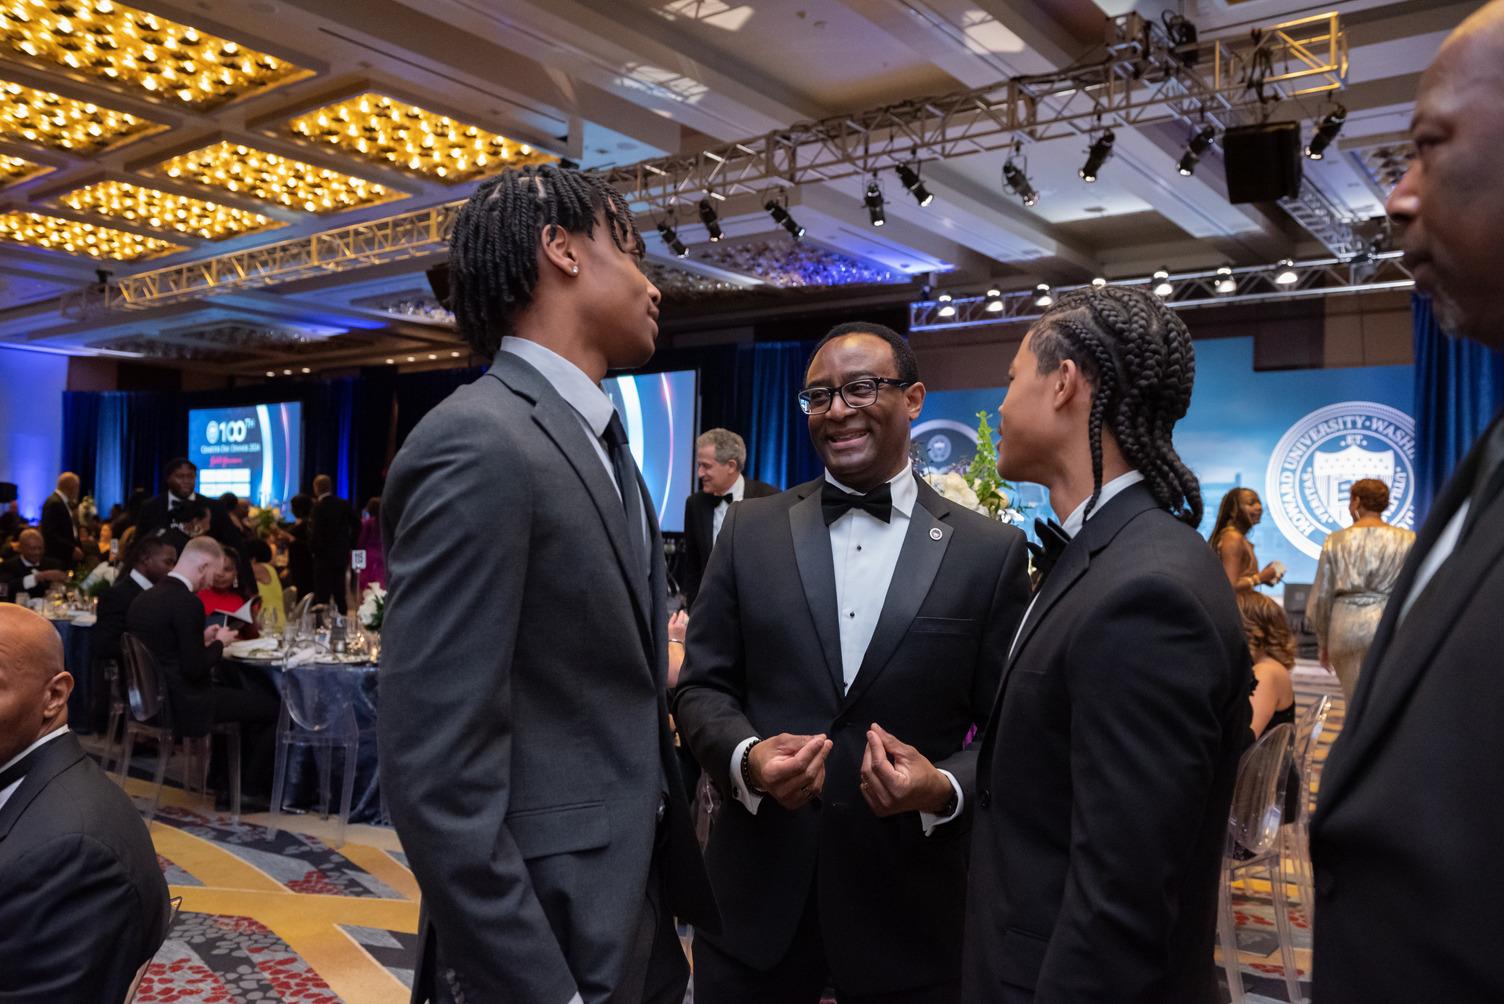 Howard University President Ben Vinson III chats with student attendees during the 100th Charter Day Dinner. (Source: Howard University)